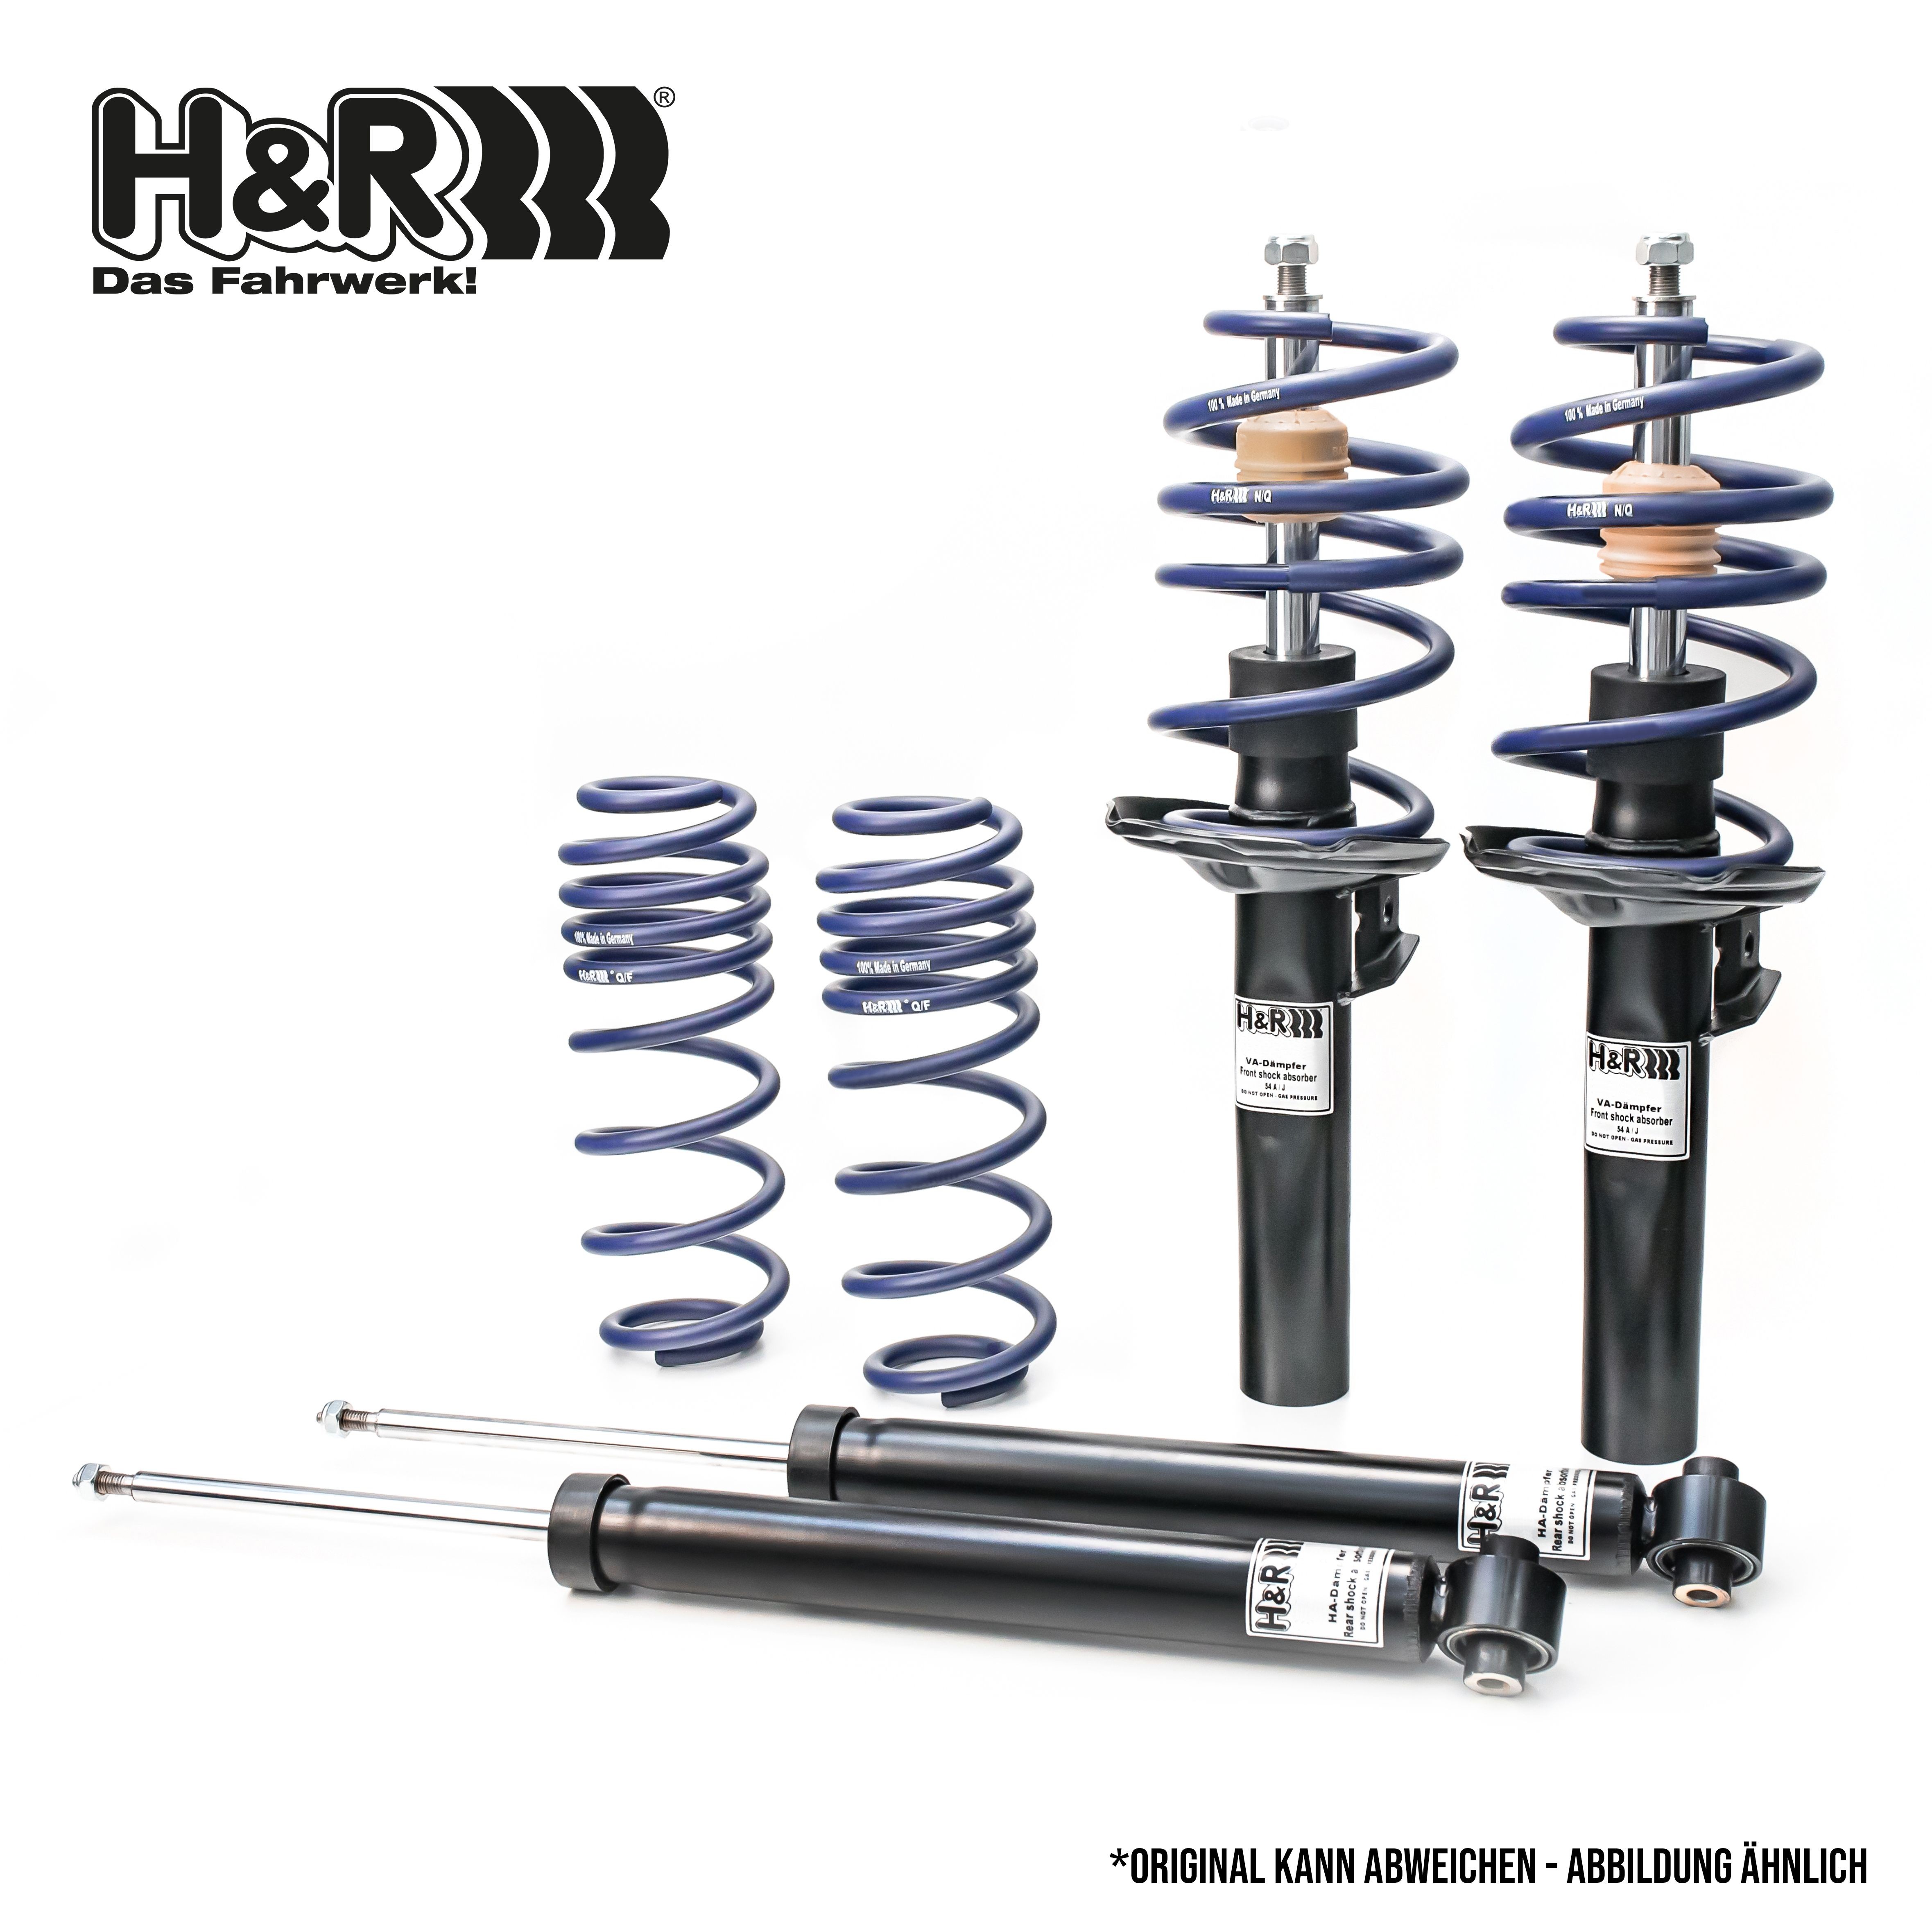 H&R Suspension Kit, coil springs / shock absorbers 40724-1 Mercedes-Benz E-Class 2011